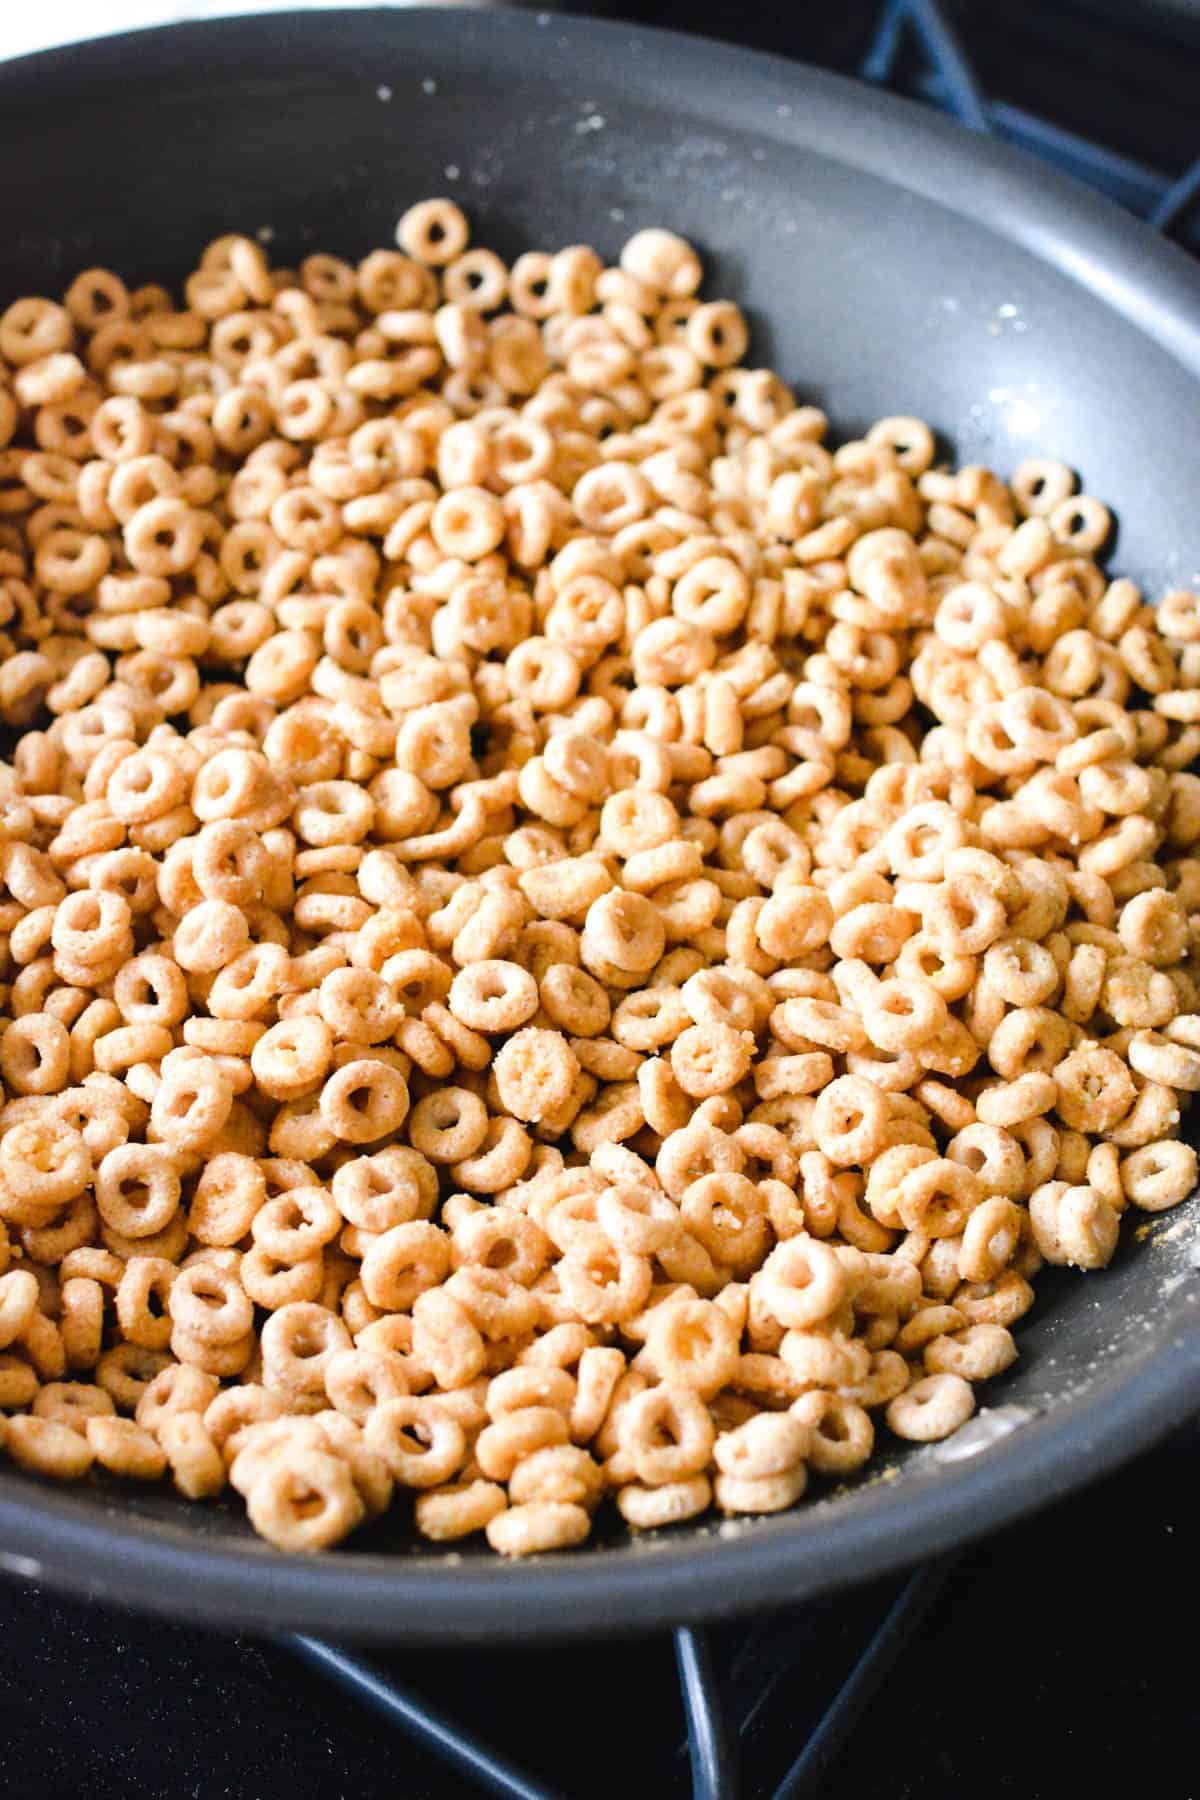 A pan with fried cheerios on the stove.